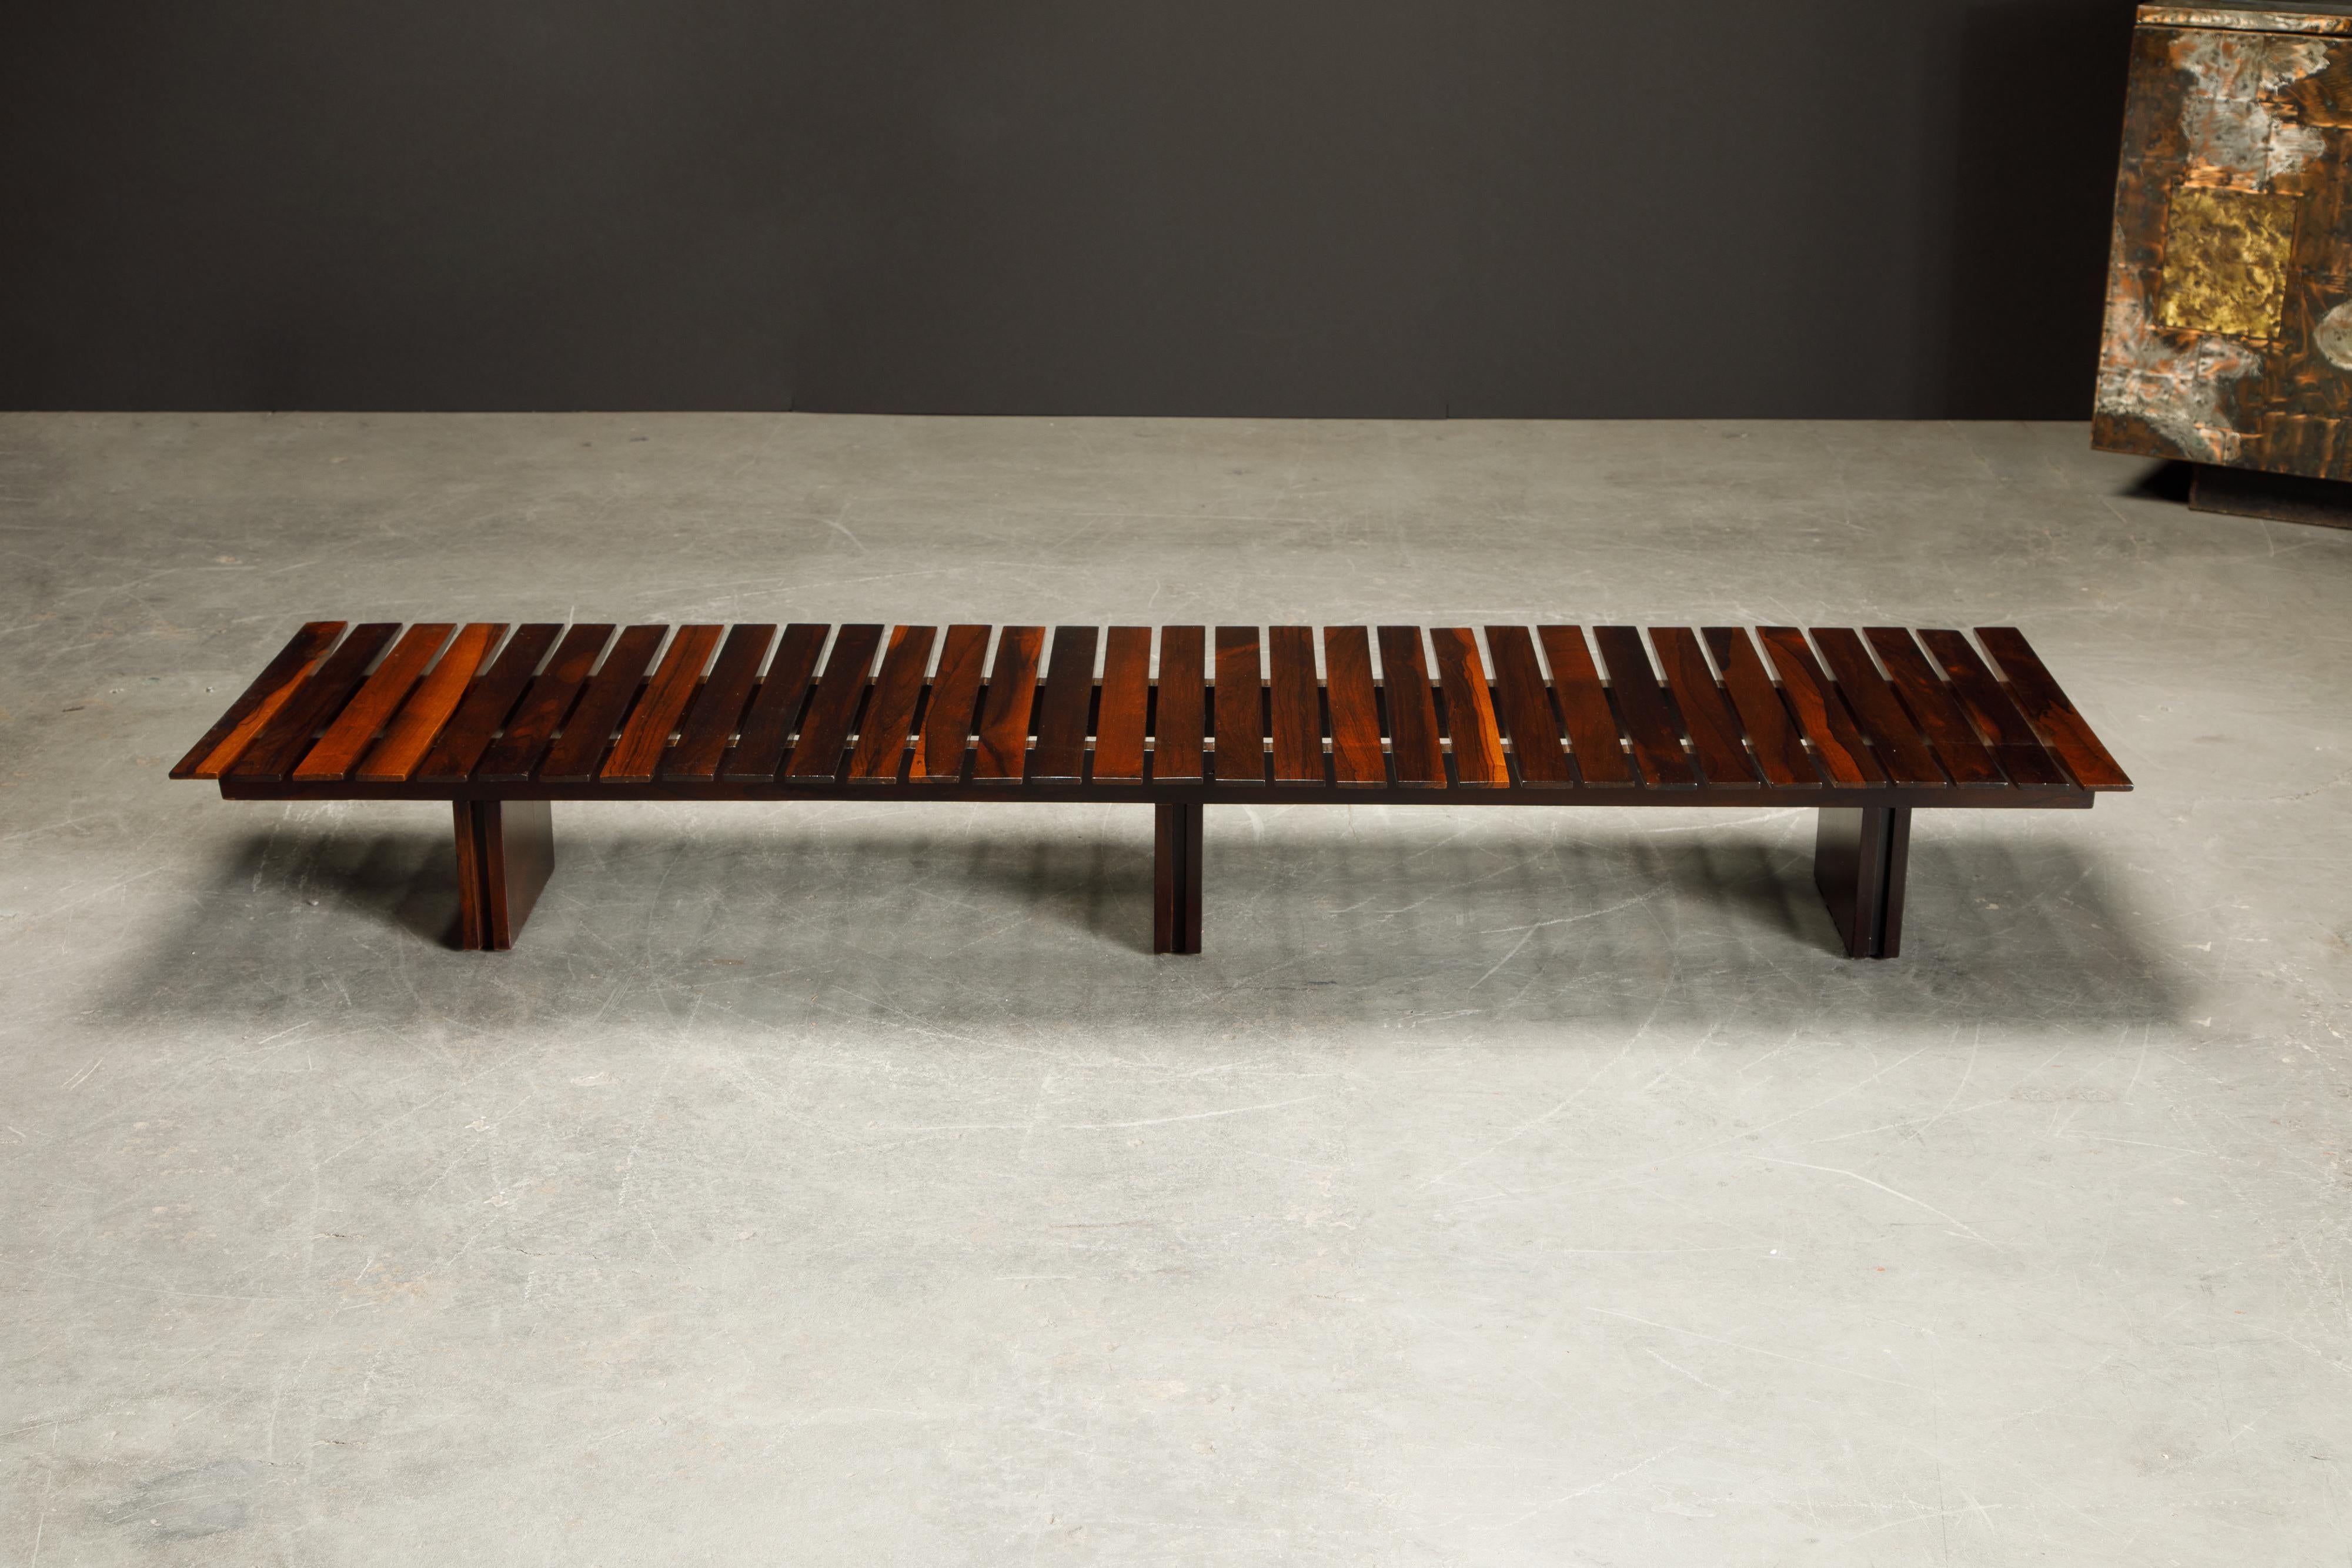 This incredible Brazilian Modern slatted Jacaranda Rosewood bench or low table was originally made in the 1960s. We sourced this piece near Rio (Brazil) and just completed restoration on it. Featuring 81